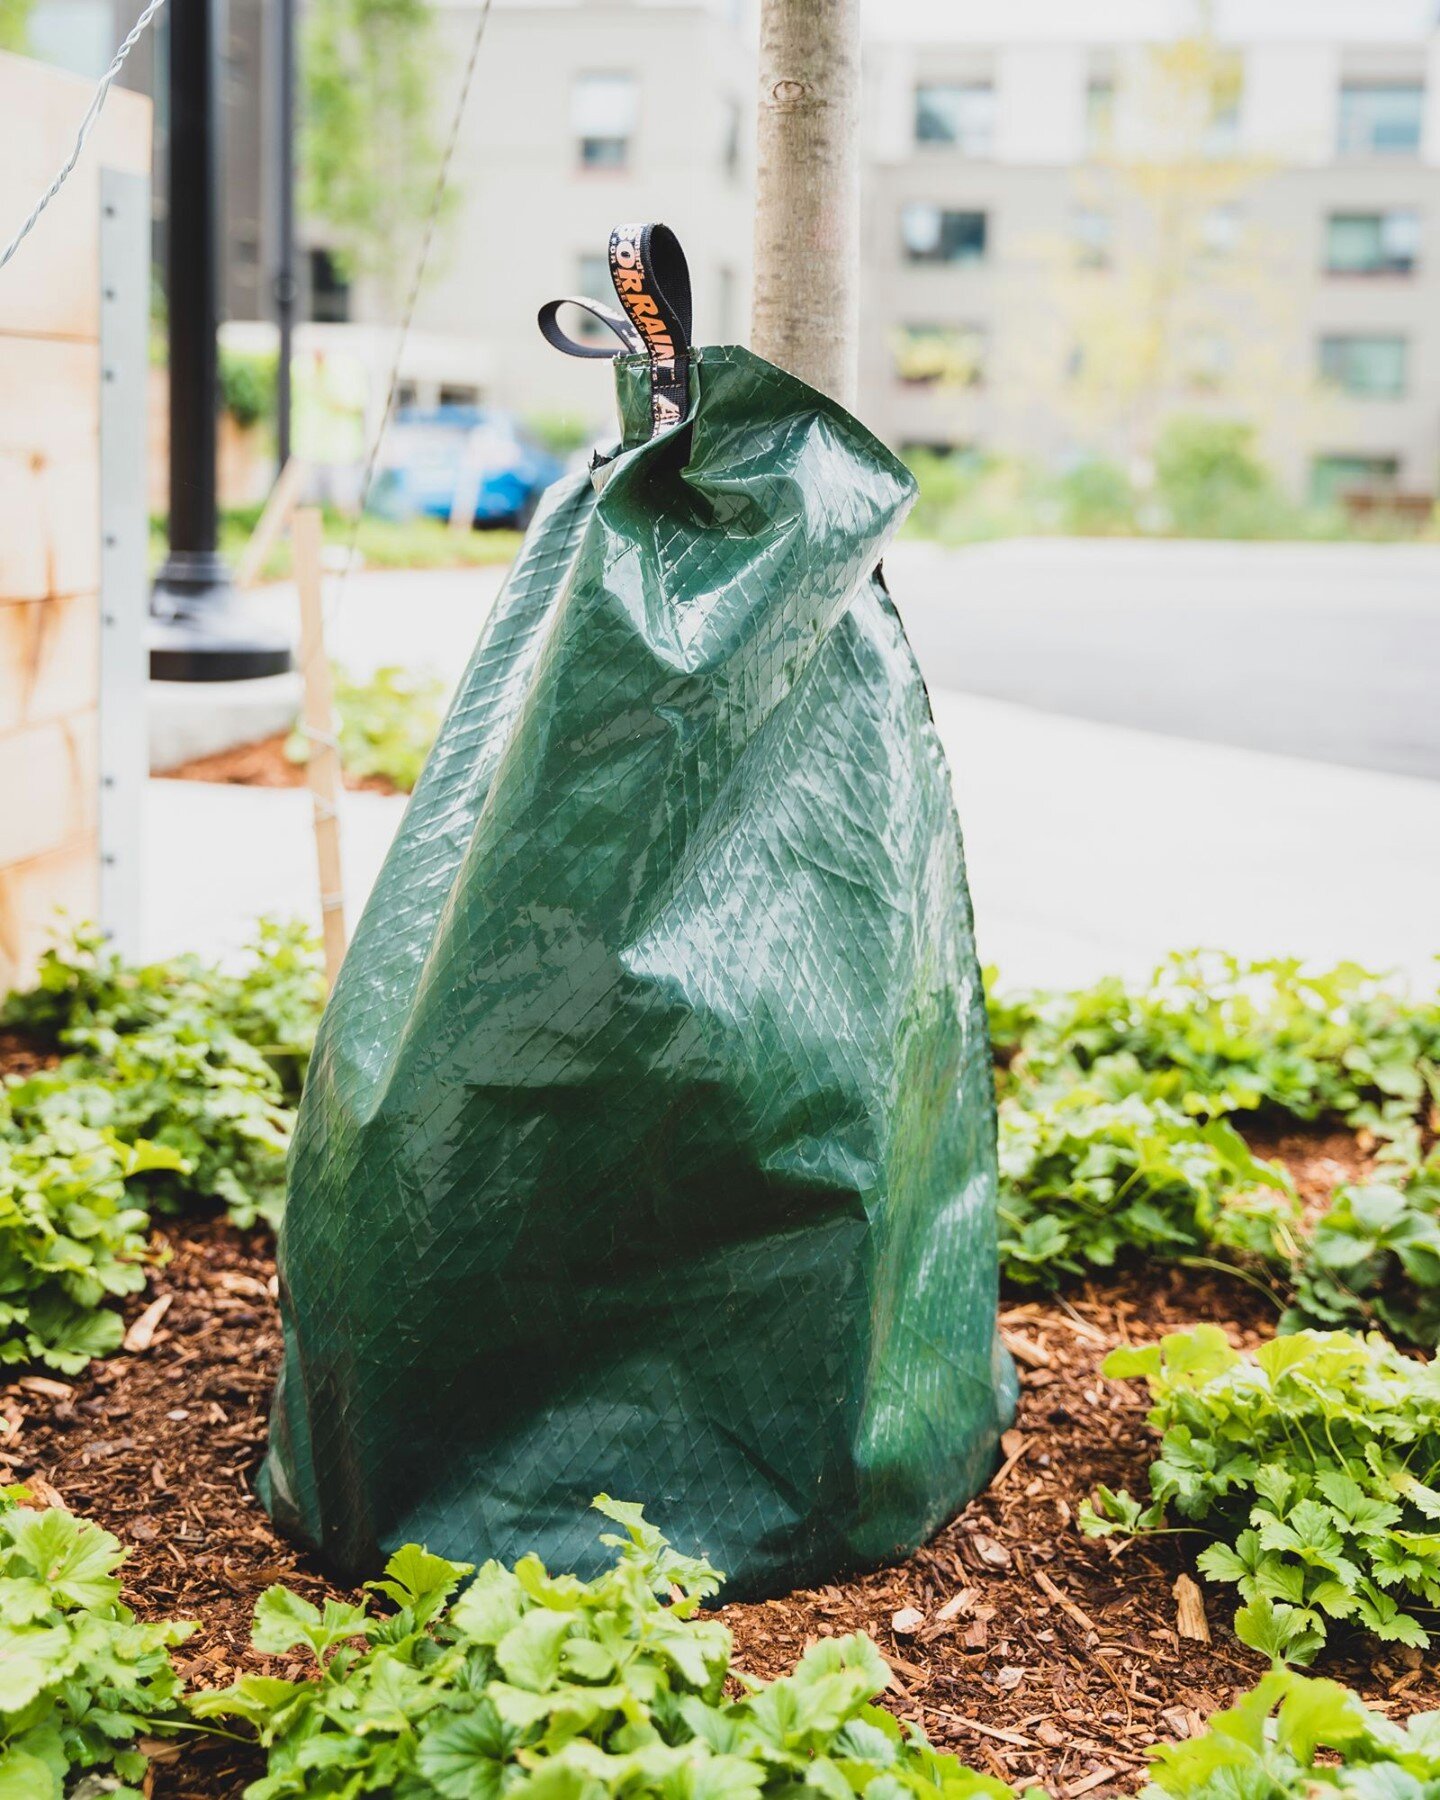 Are you wondering what the strange-looking dark green bags wrapped around so many local trees are for? ⠀
⠀
These are called self watering &lsquo;Tree Bags, and they are essential for helping newly planted trees survive and thrive. ⠀
⠀
Summer temperat